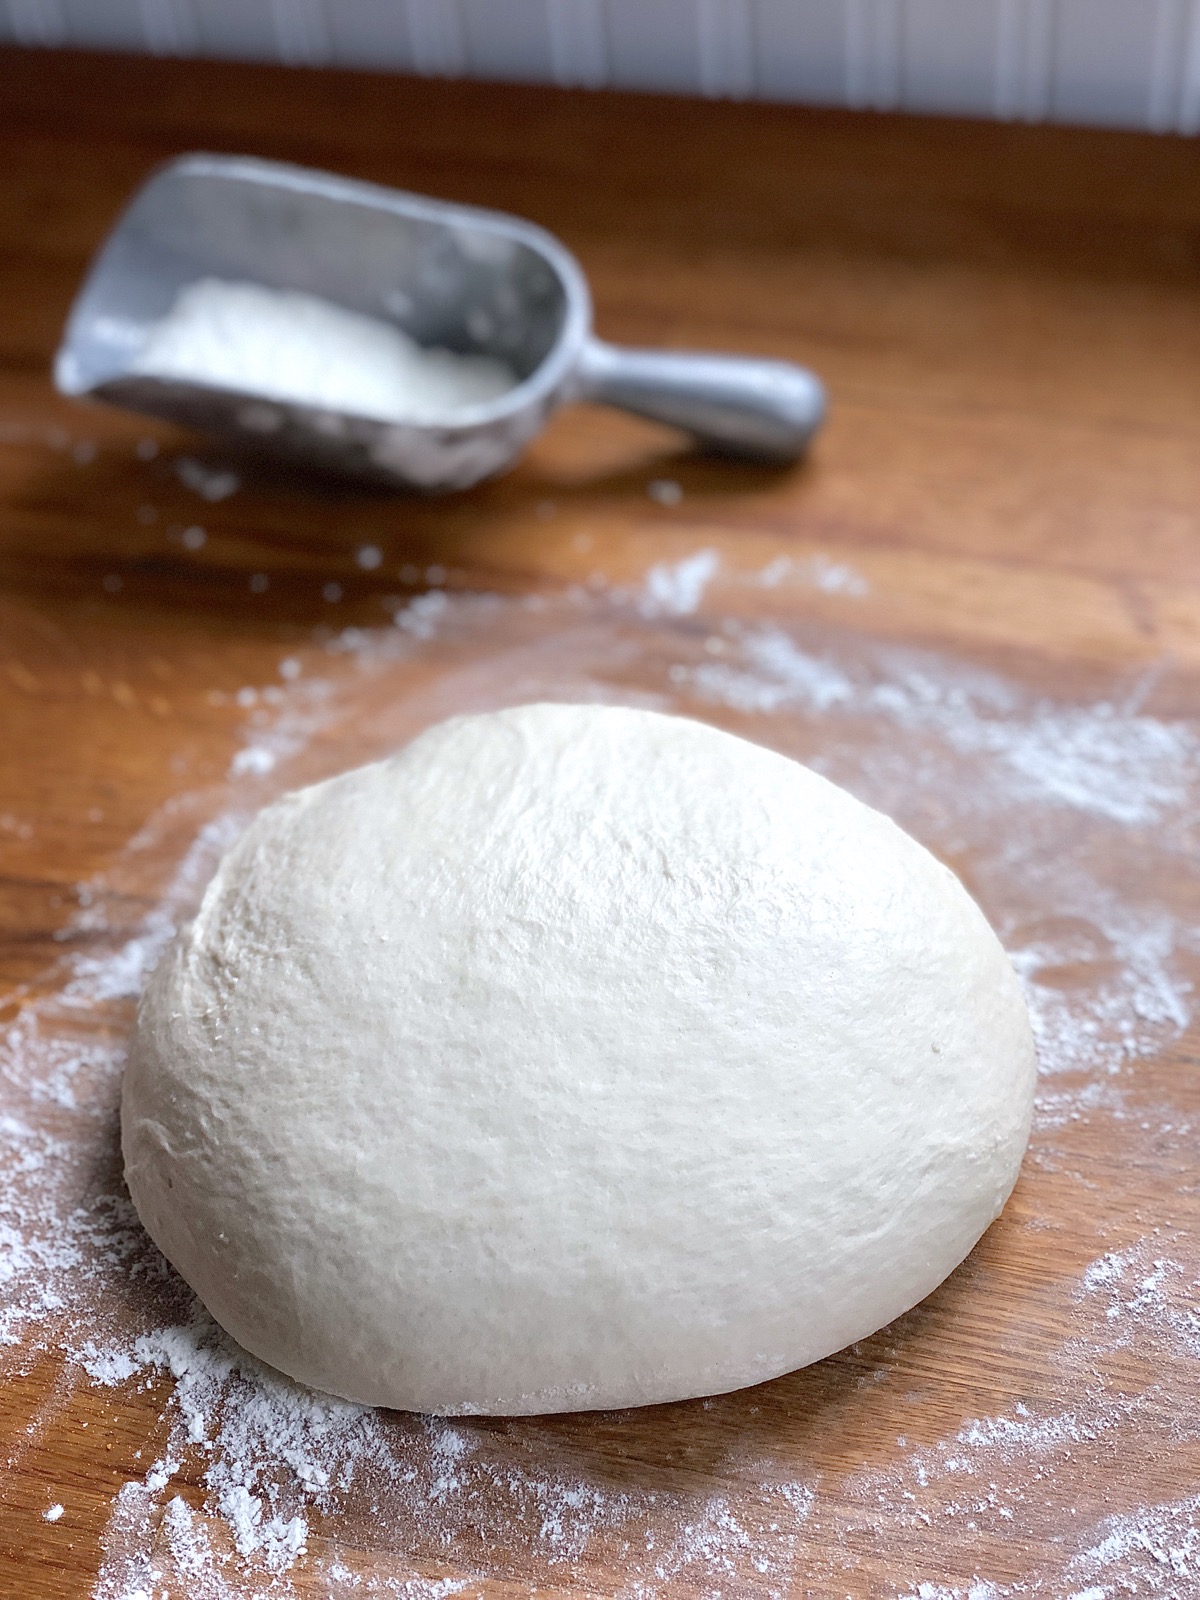 Fully kneaded dough for Rustic Sourdough Bread, resting on a floured board.